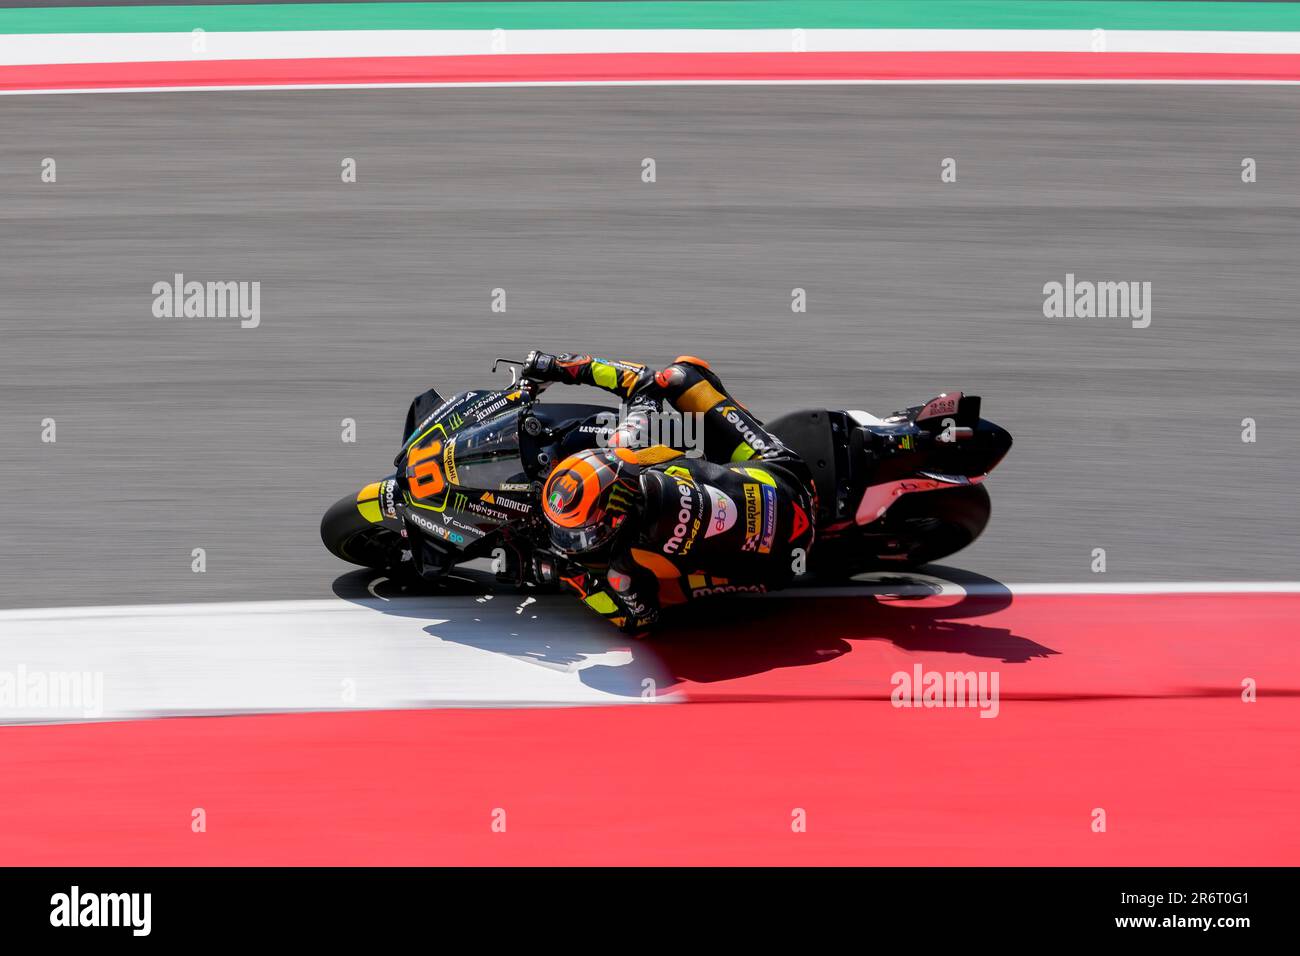 Italian rider Luca Marini of the Mooney VR46 Racing Team steers his motorcycle during the MotoGP race of the Grand Prix of Italy at the Mugello circuit in Scarperia, Italy, Sunday, June